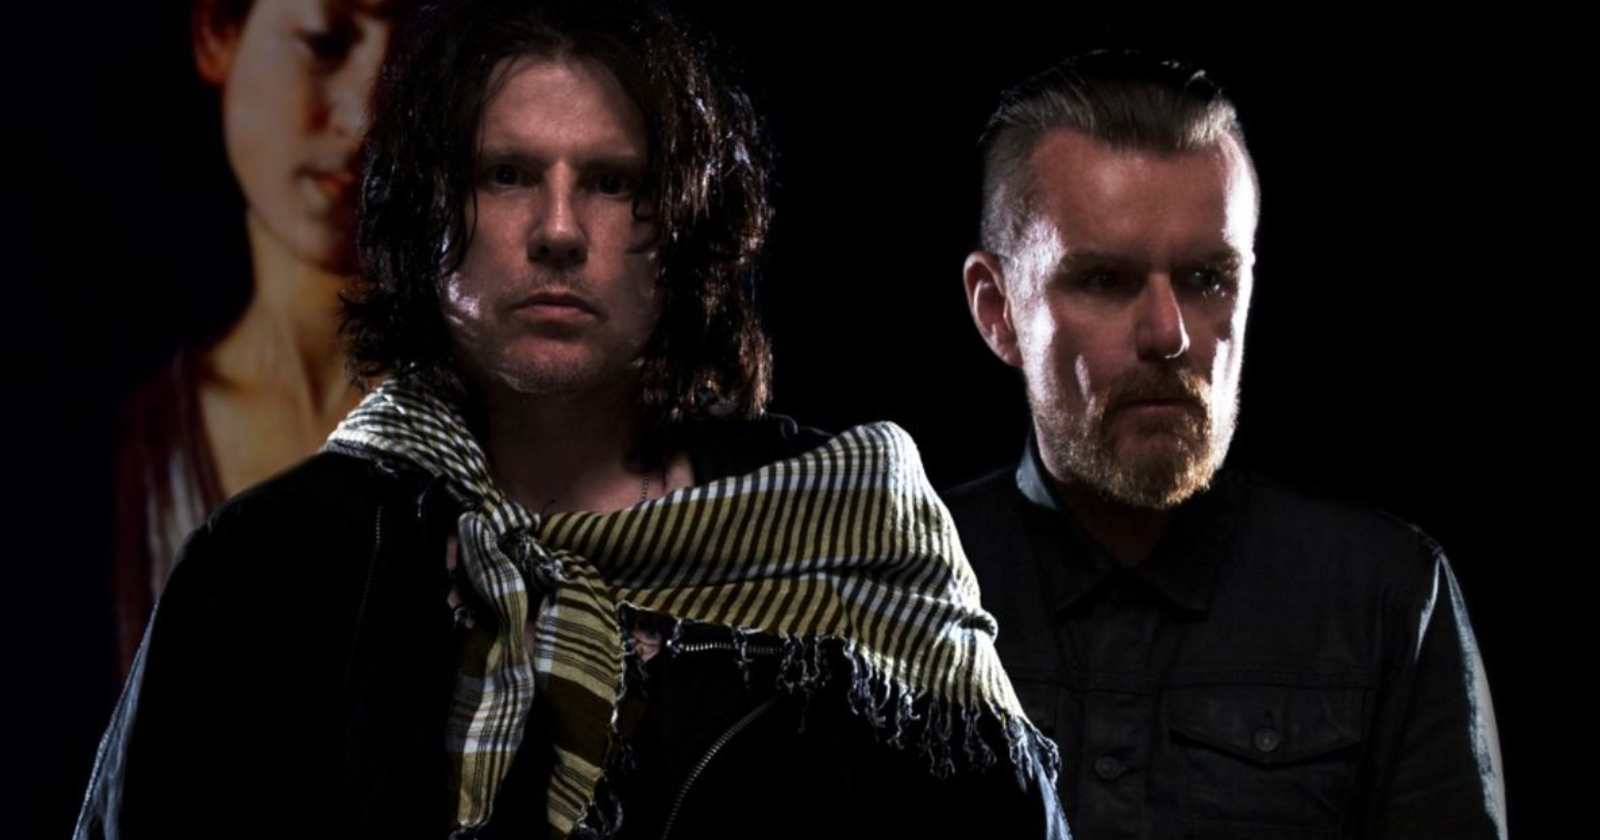 the cult current tour